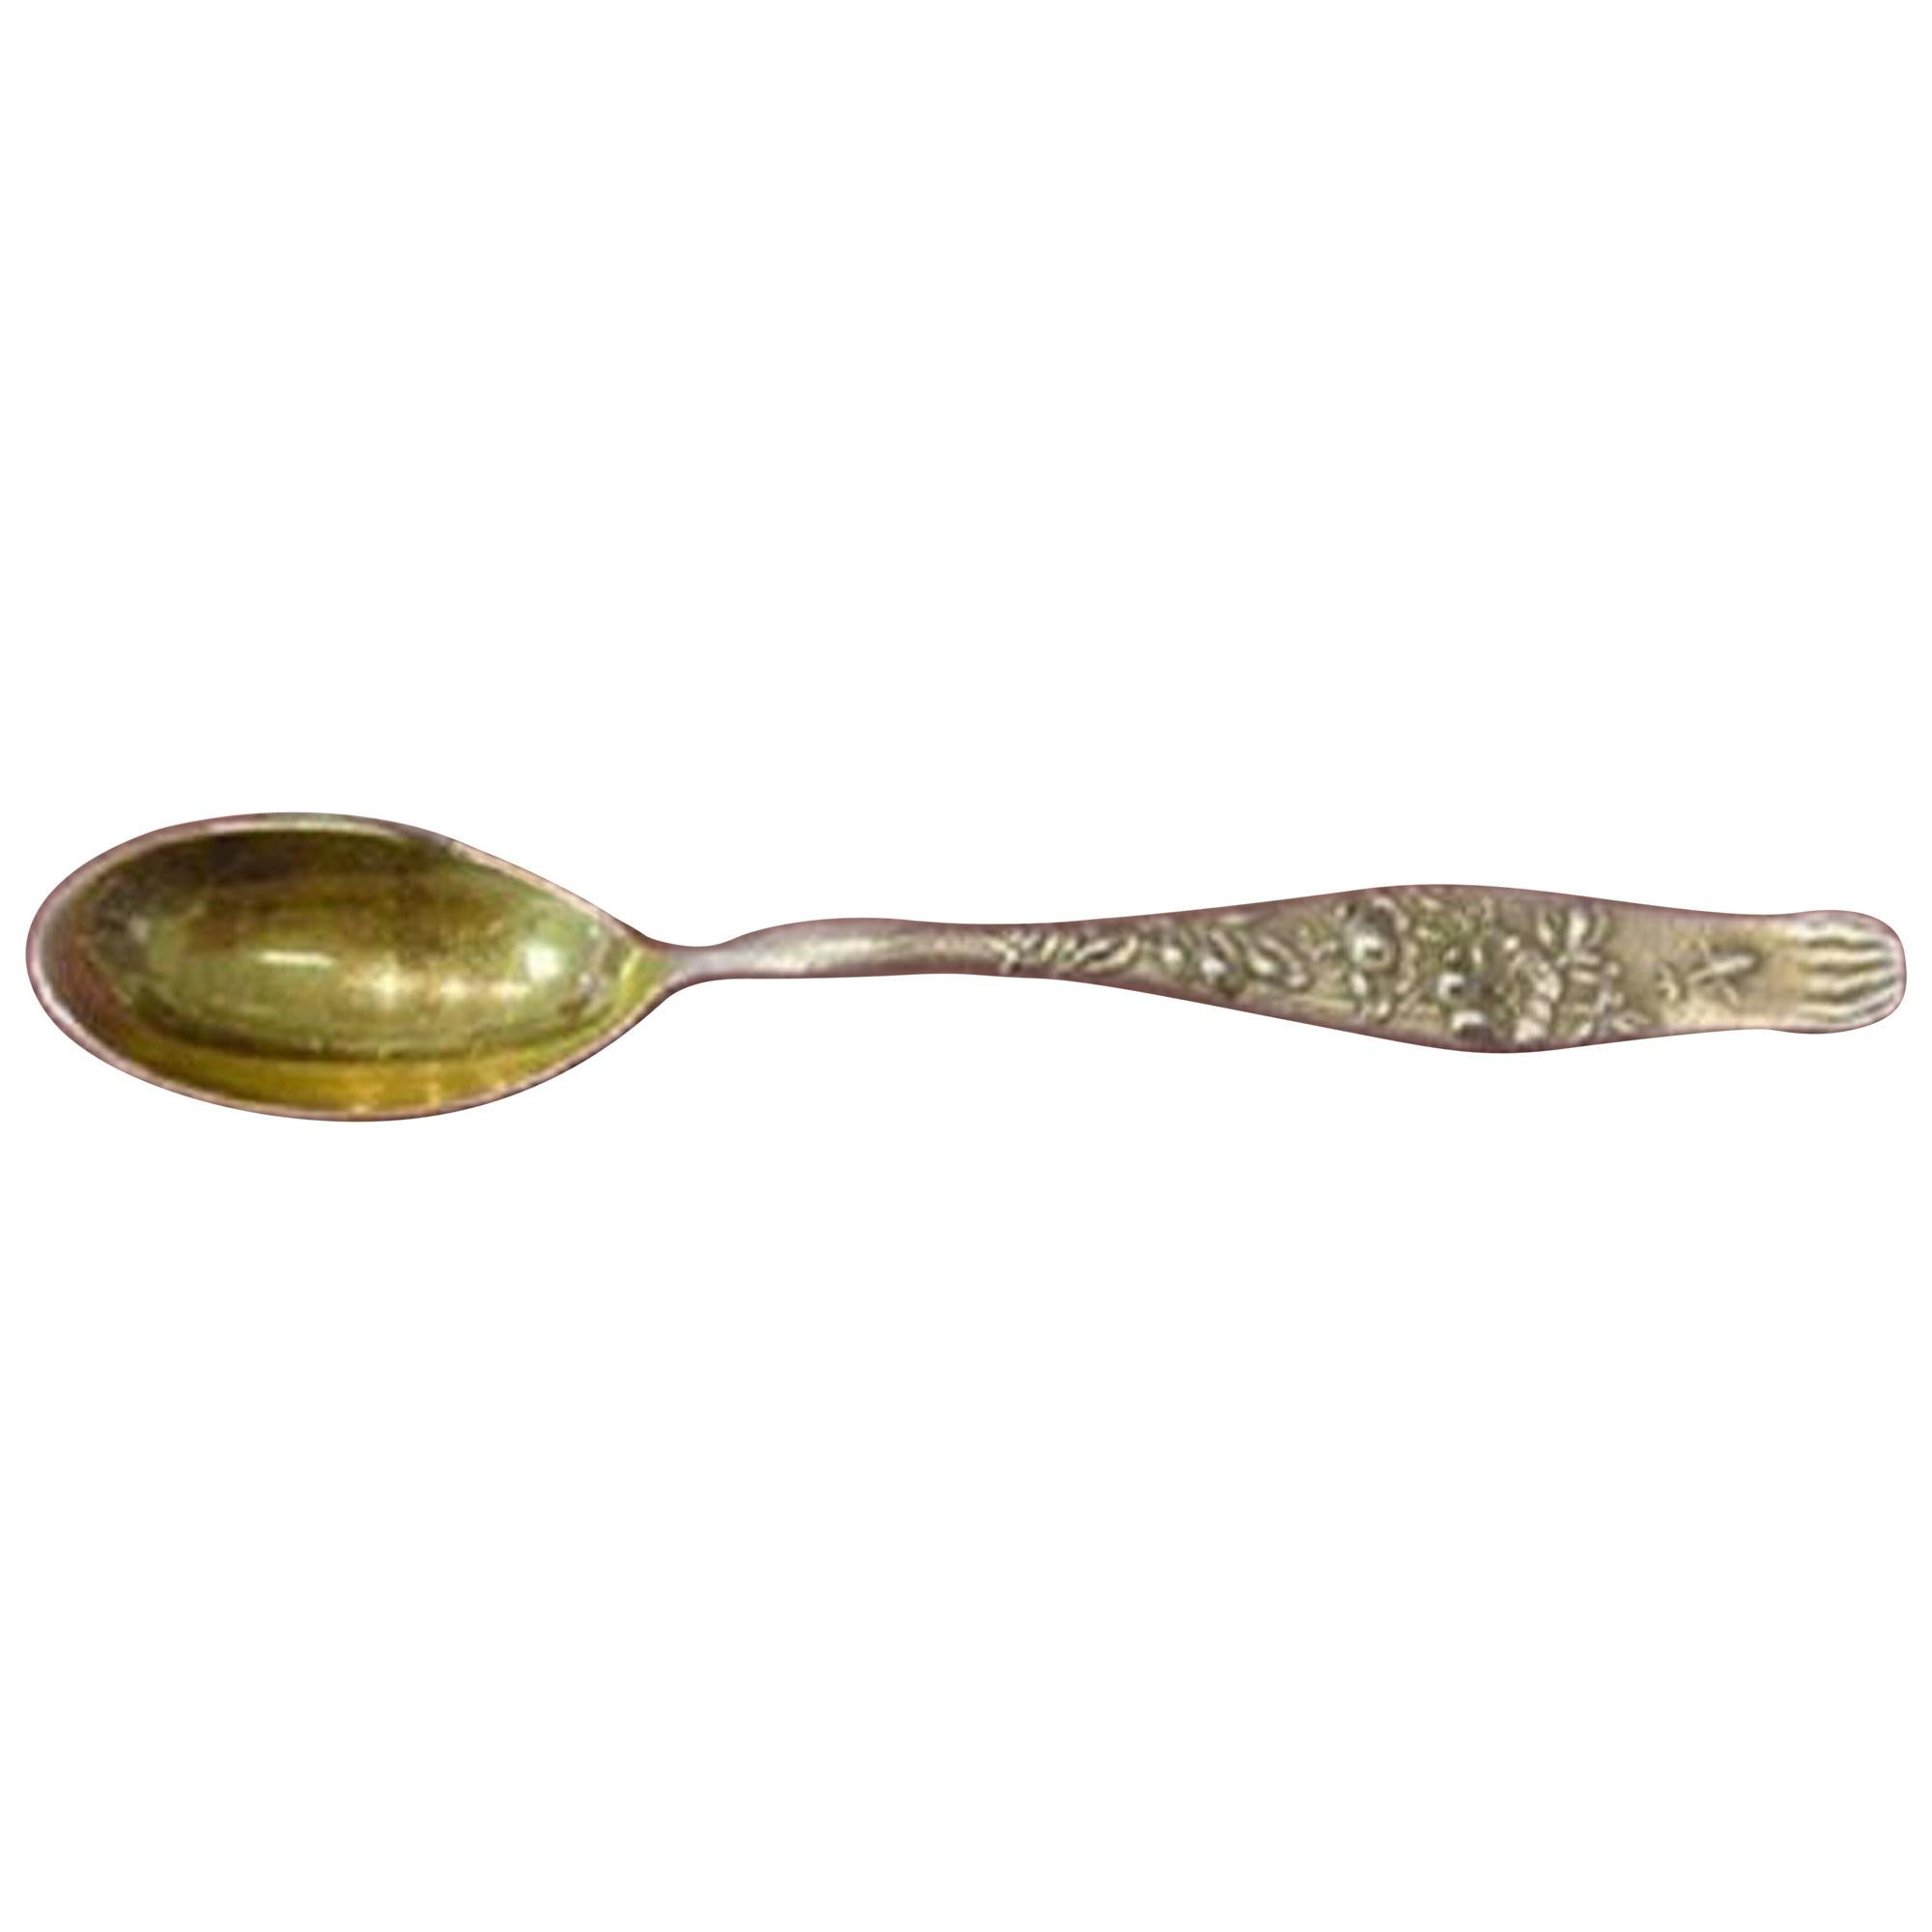 Vine by Tiffany Sterling Silver Demitasse Spoon Vermeil with Wild Rose